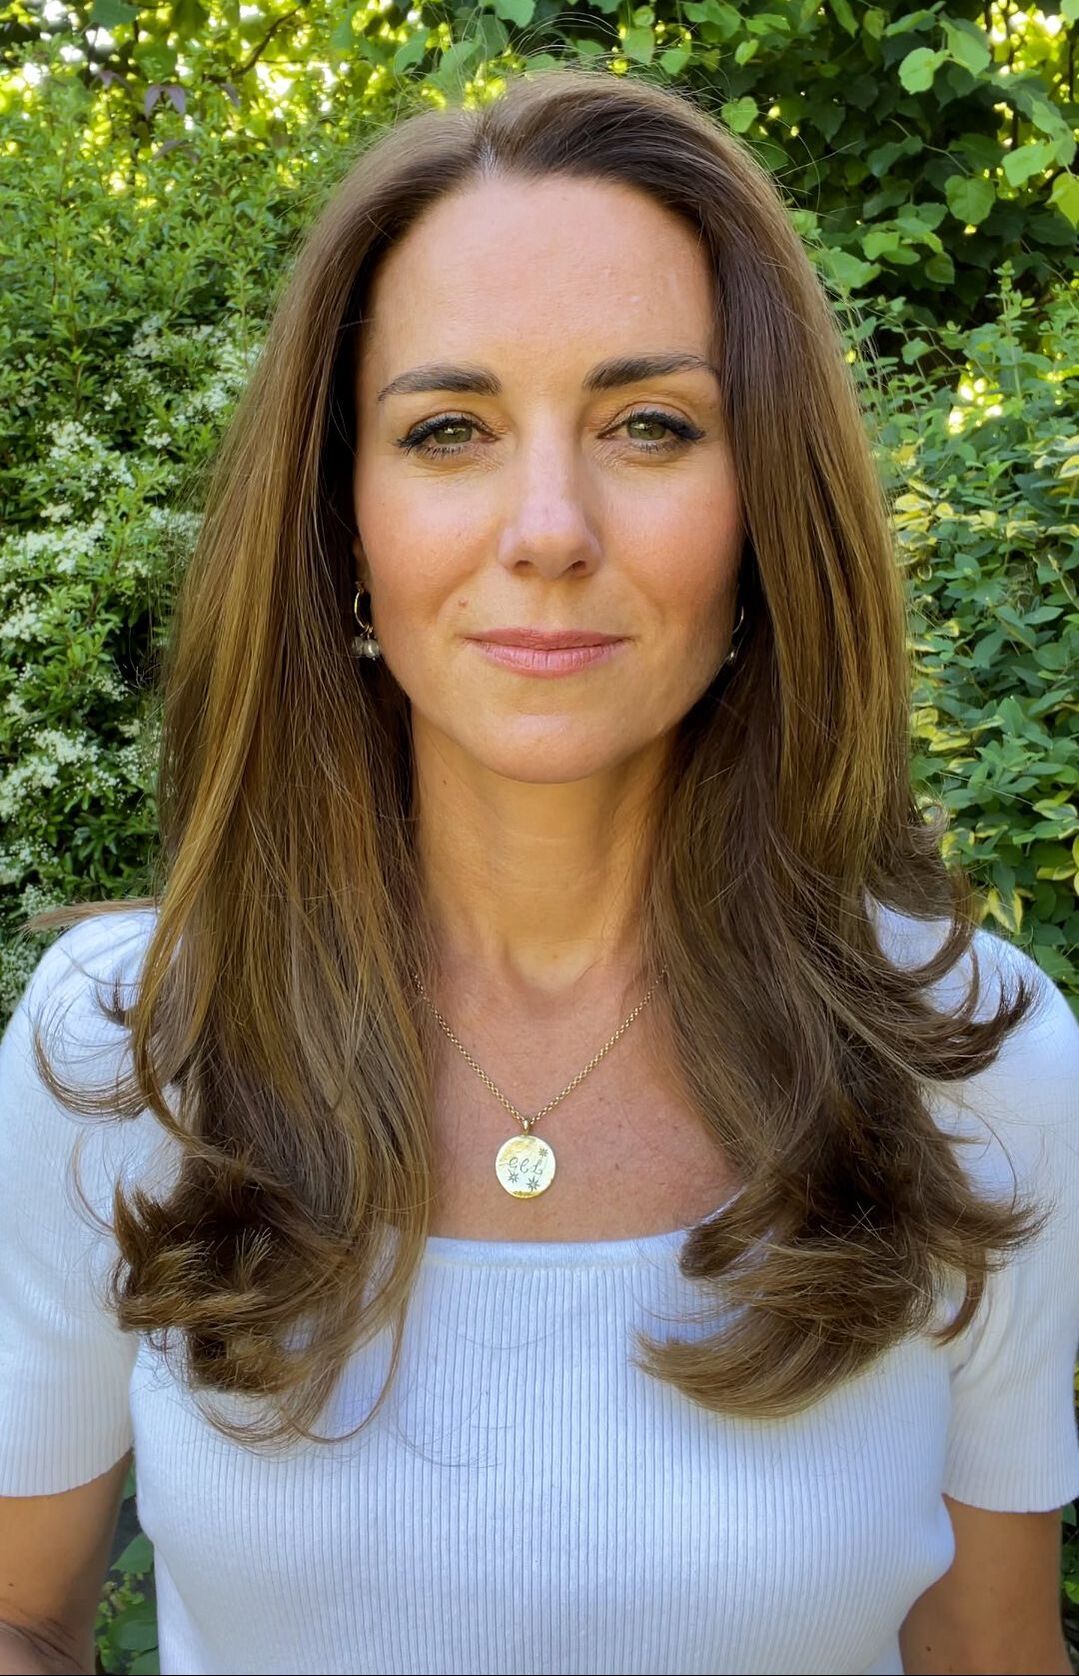 The Duchess of Cambridge launches The Royal Foundation Centre for Early Childhood in June 2021